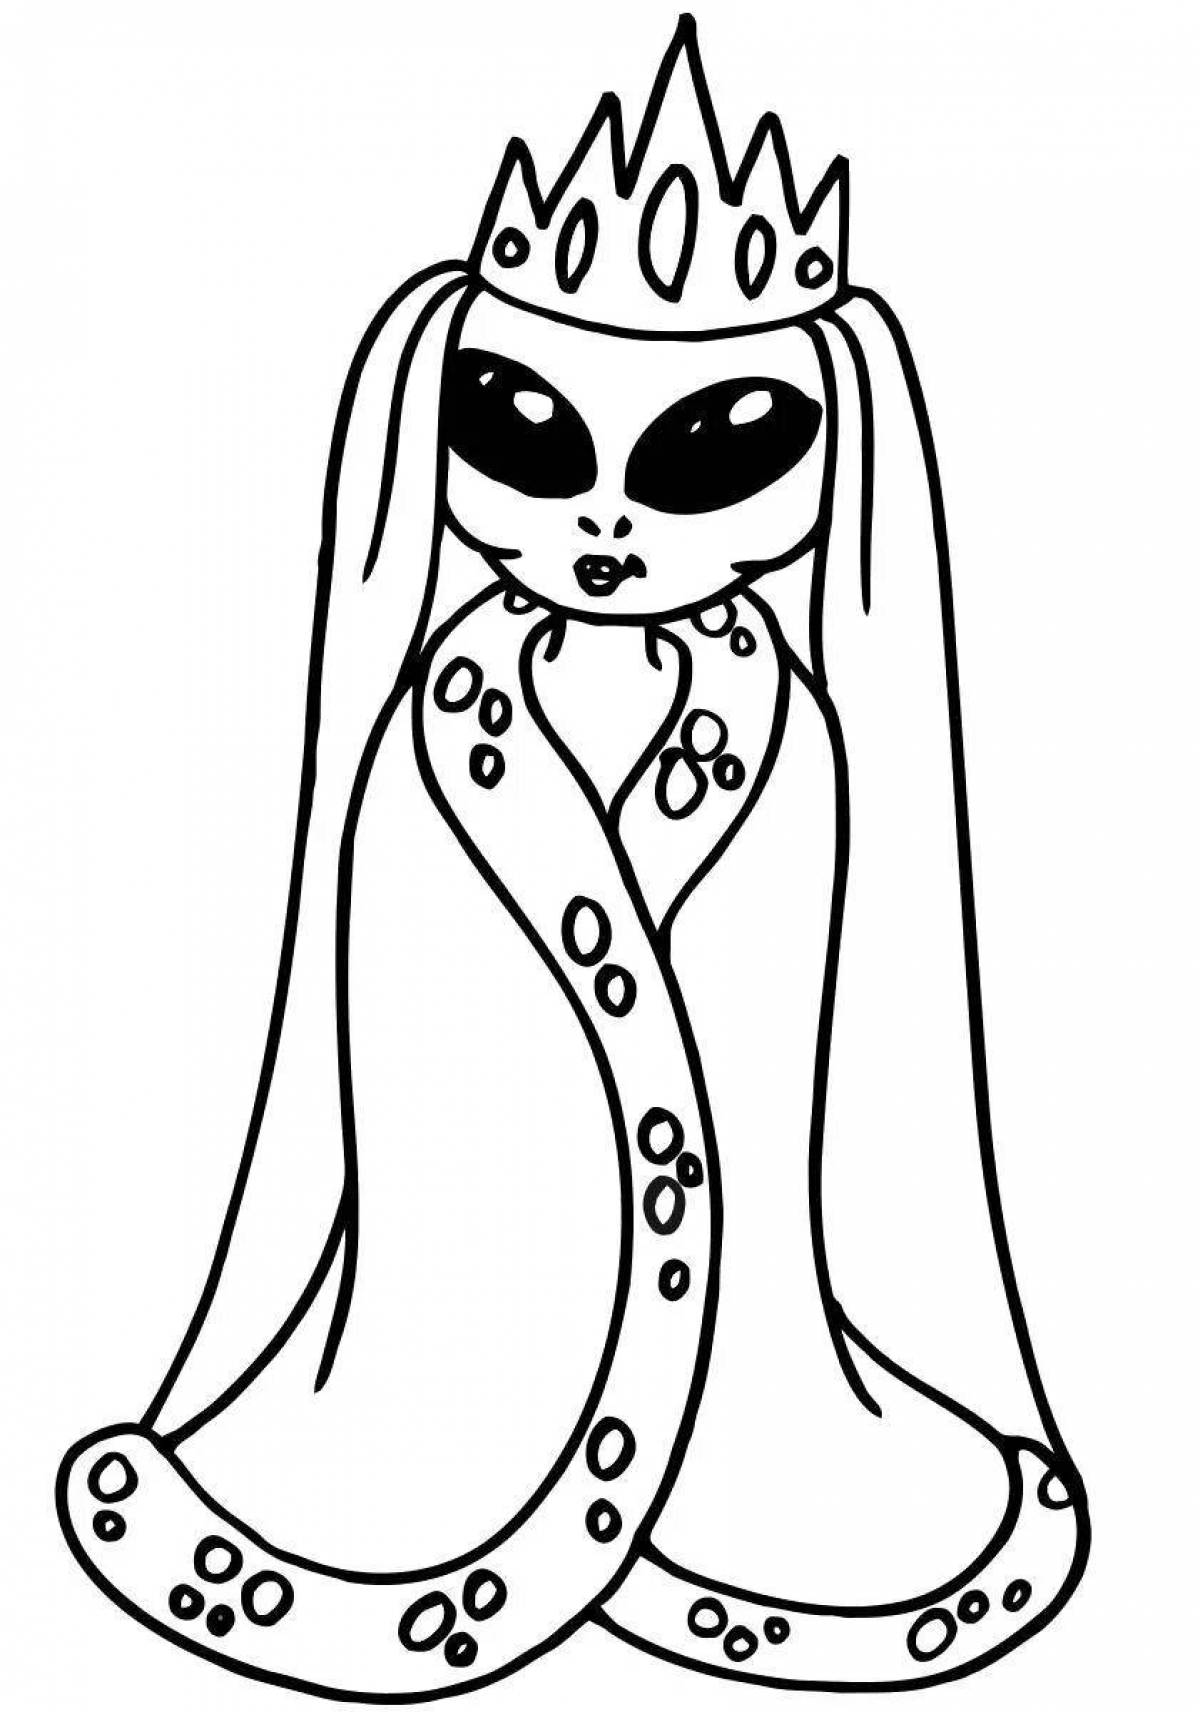 Adorable alien coloring pages for kids